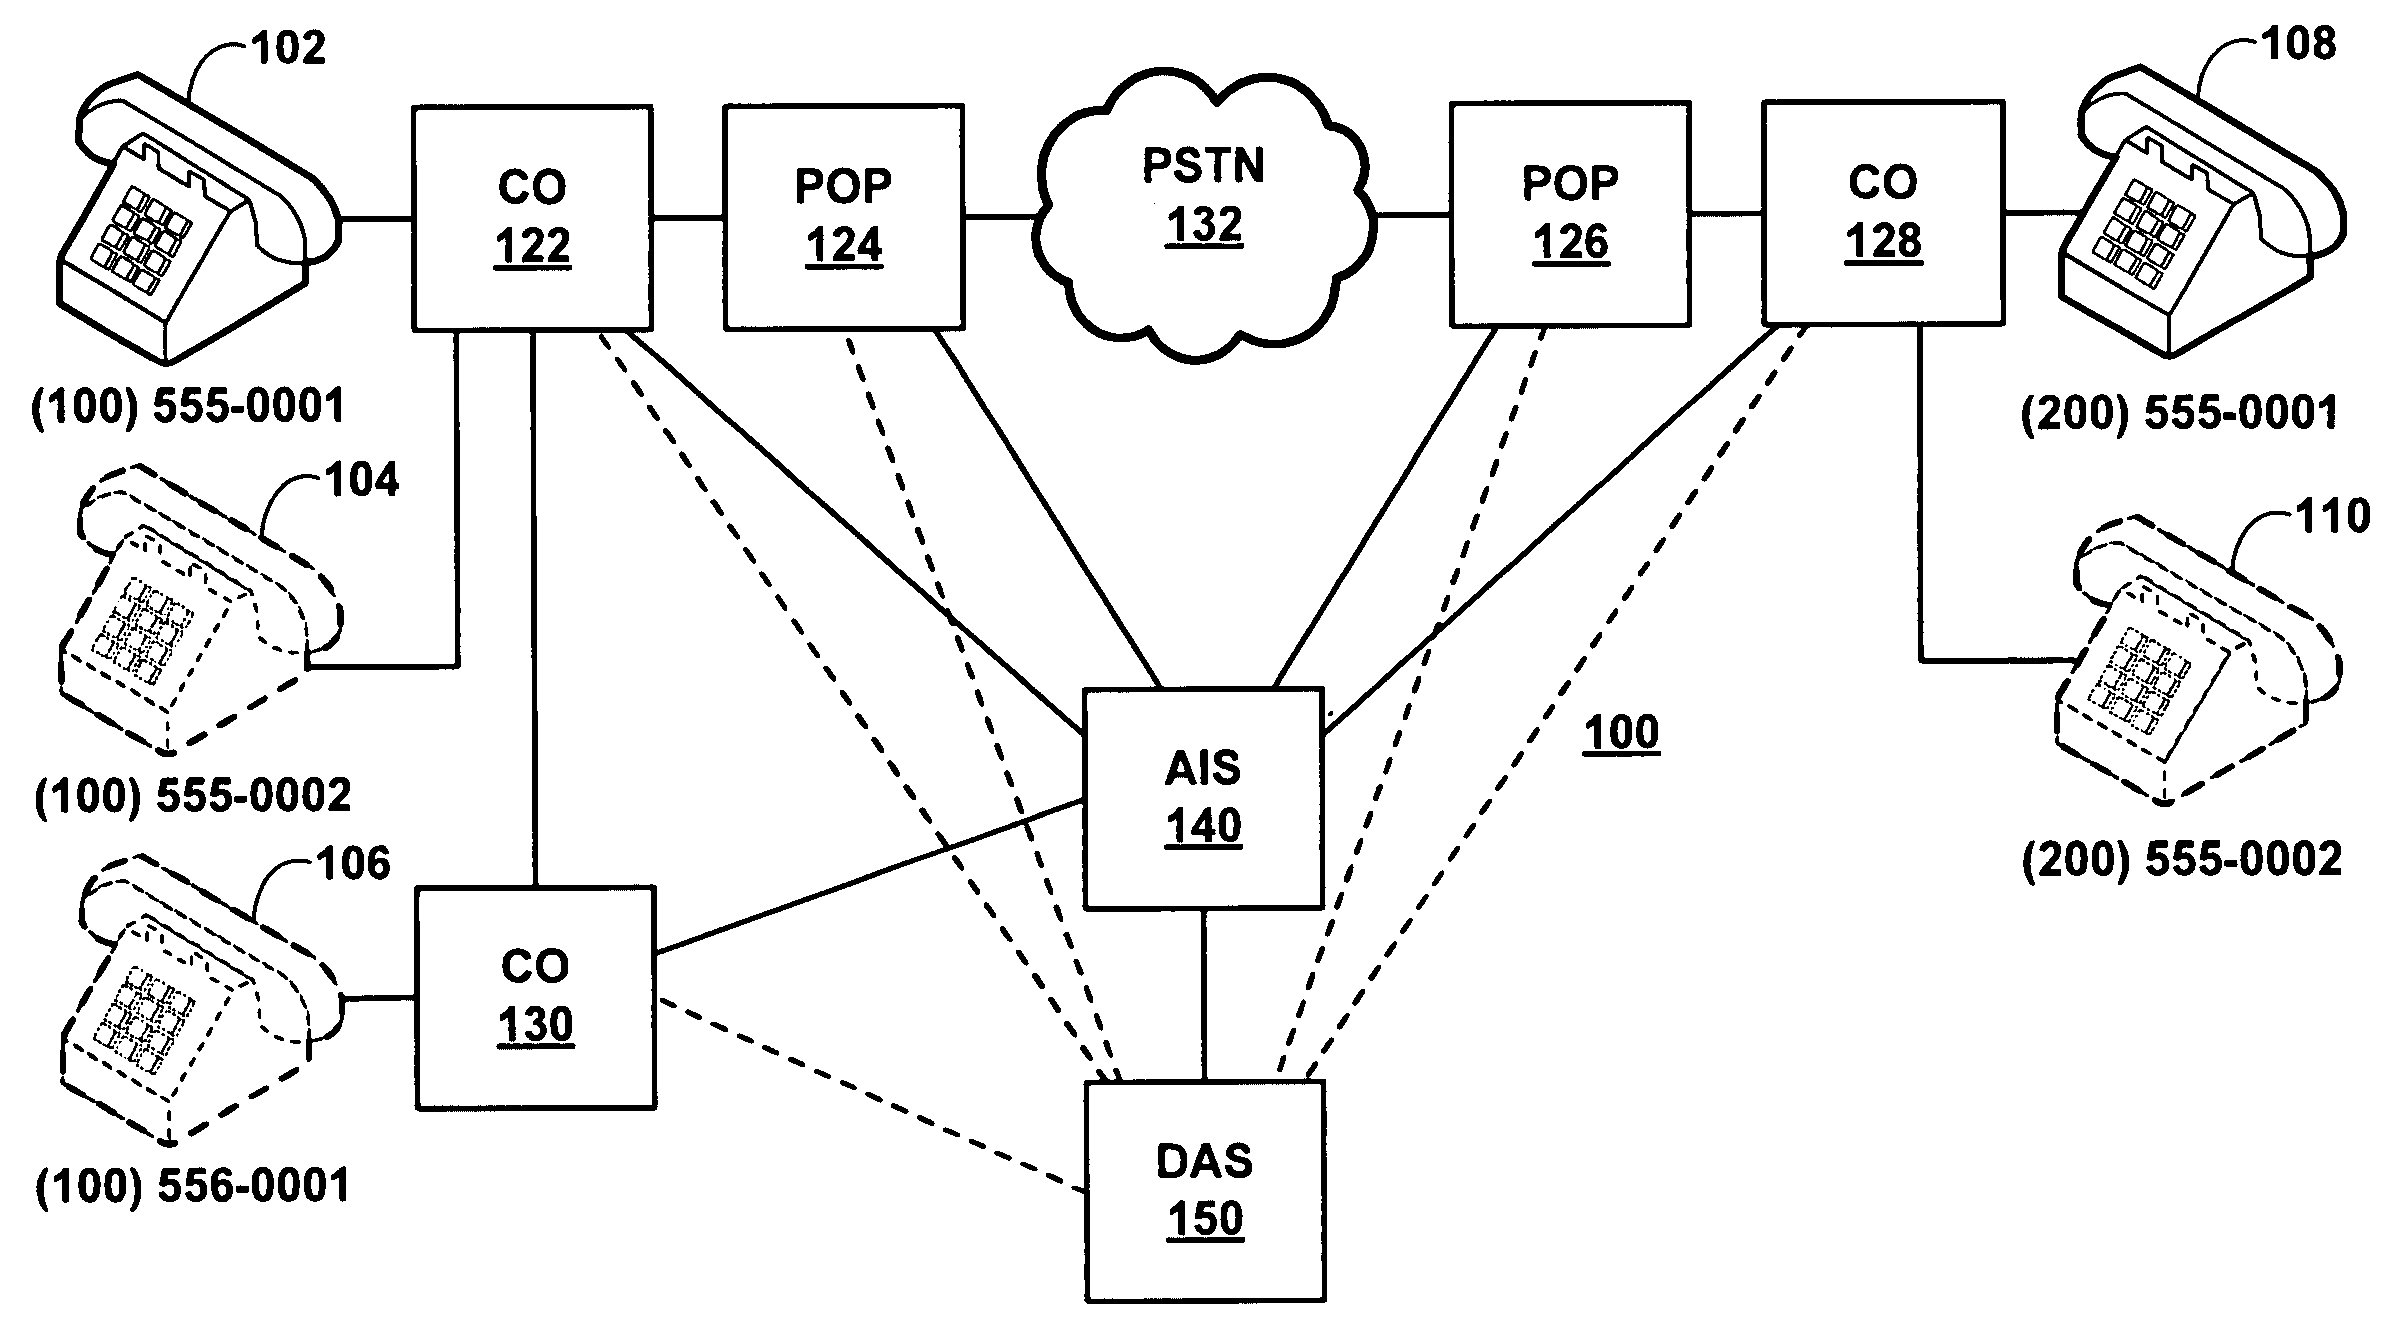 Method and system for providing directory assistance to erroneous telephone calls